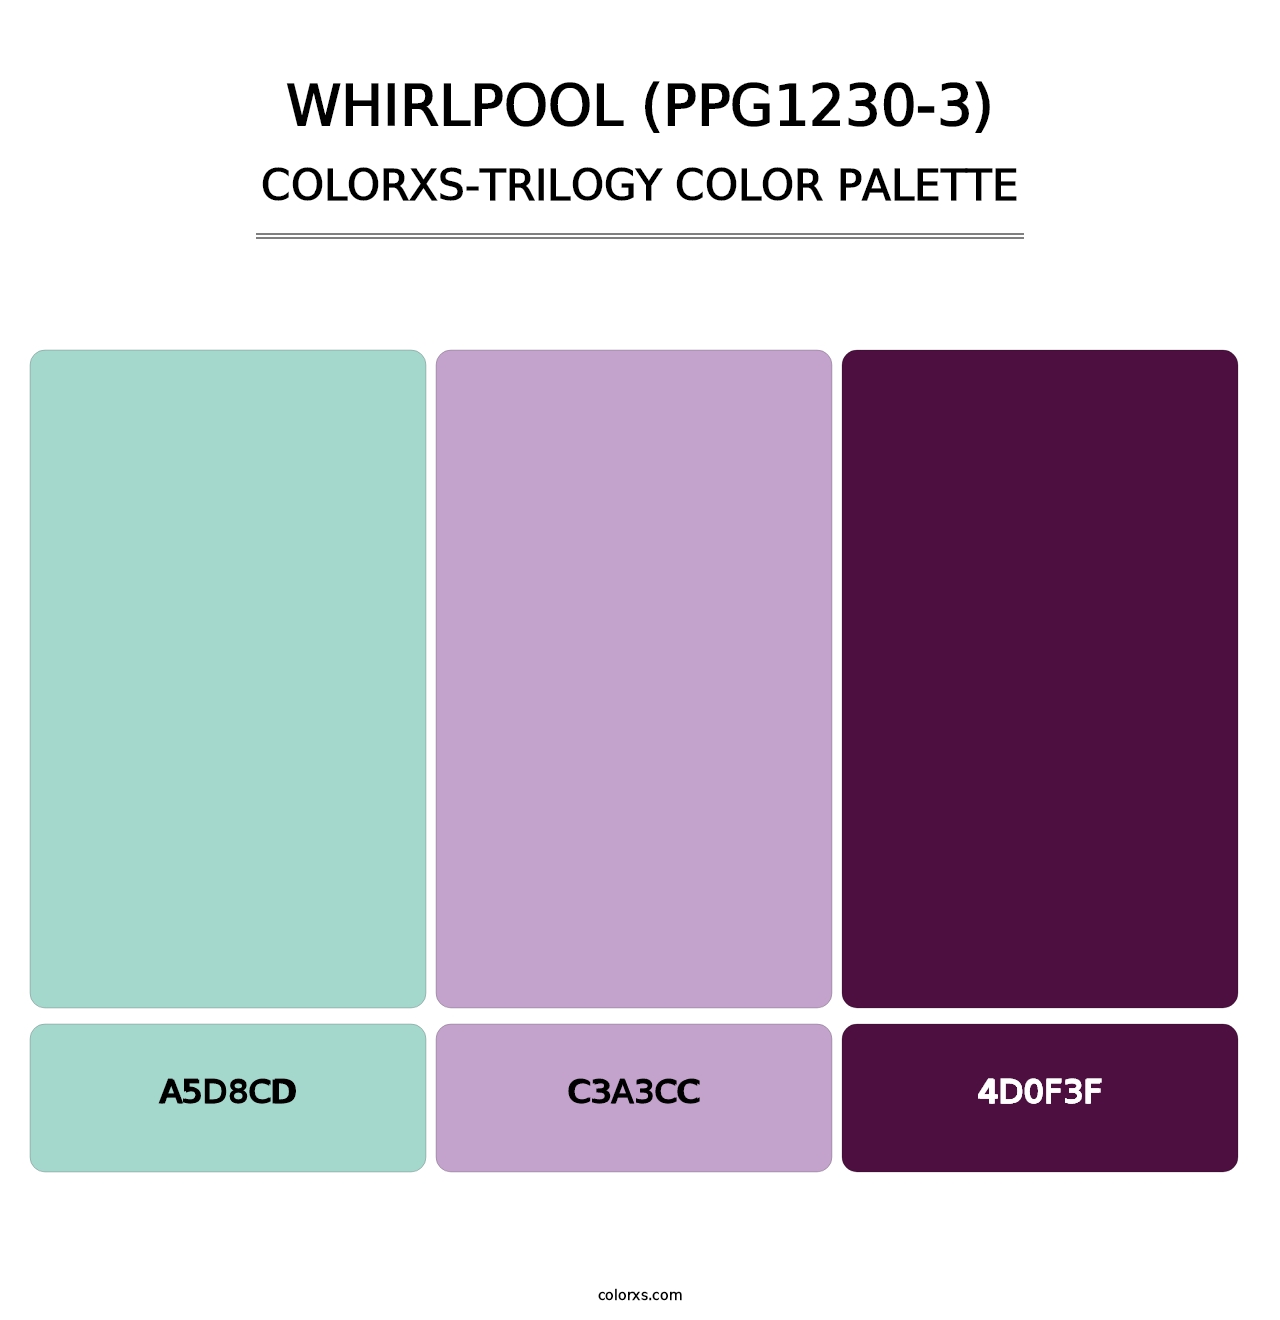 Whirlpool (PPG1230-3) - Colorxs Trilogy Palette